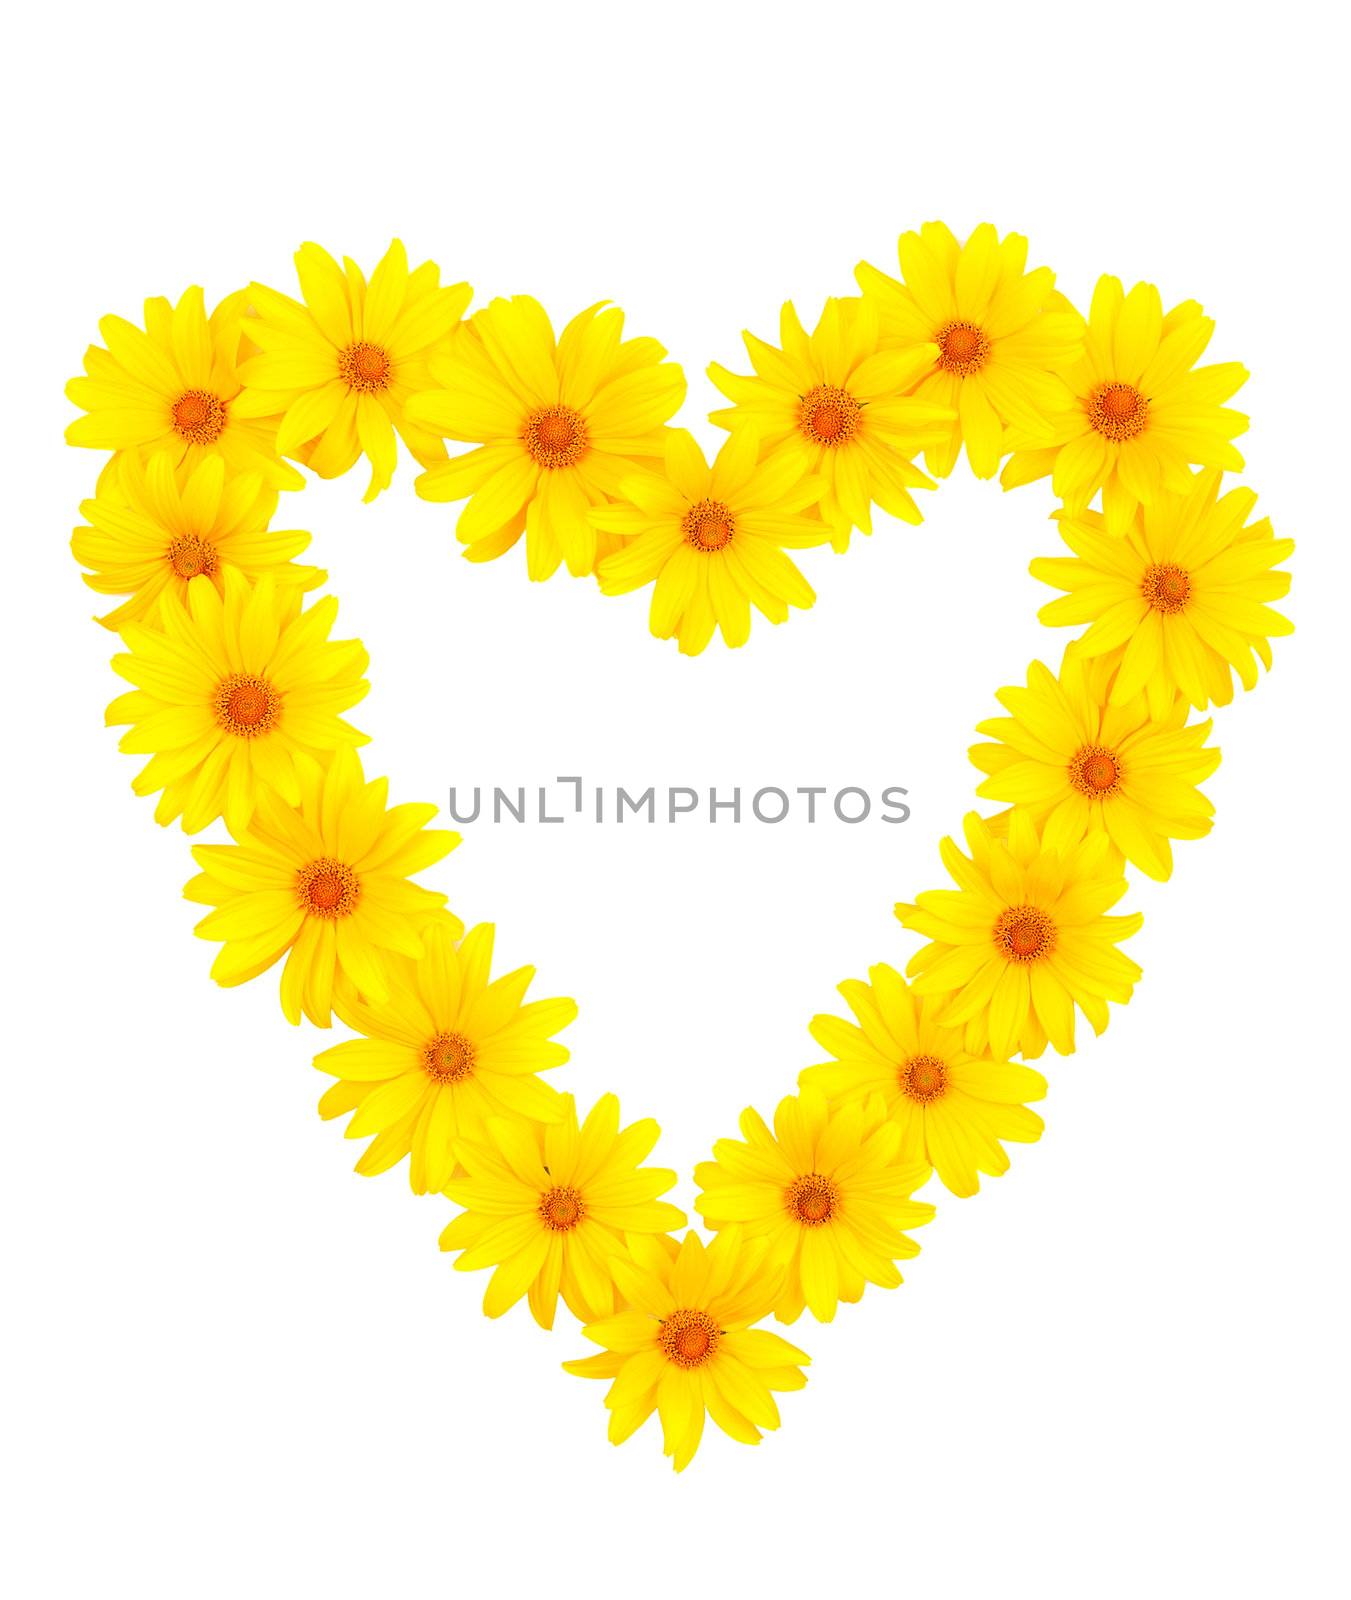 The beautiful frame heart of yellow flowers